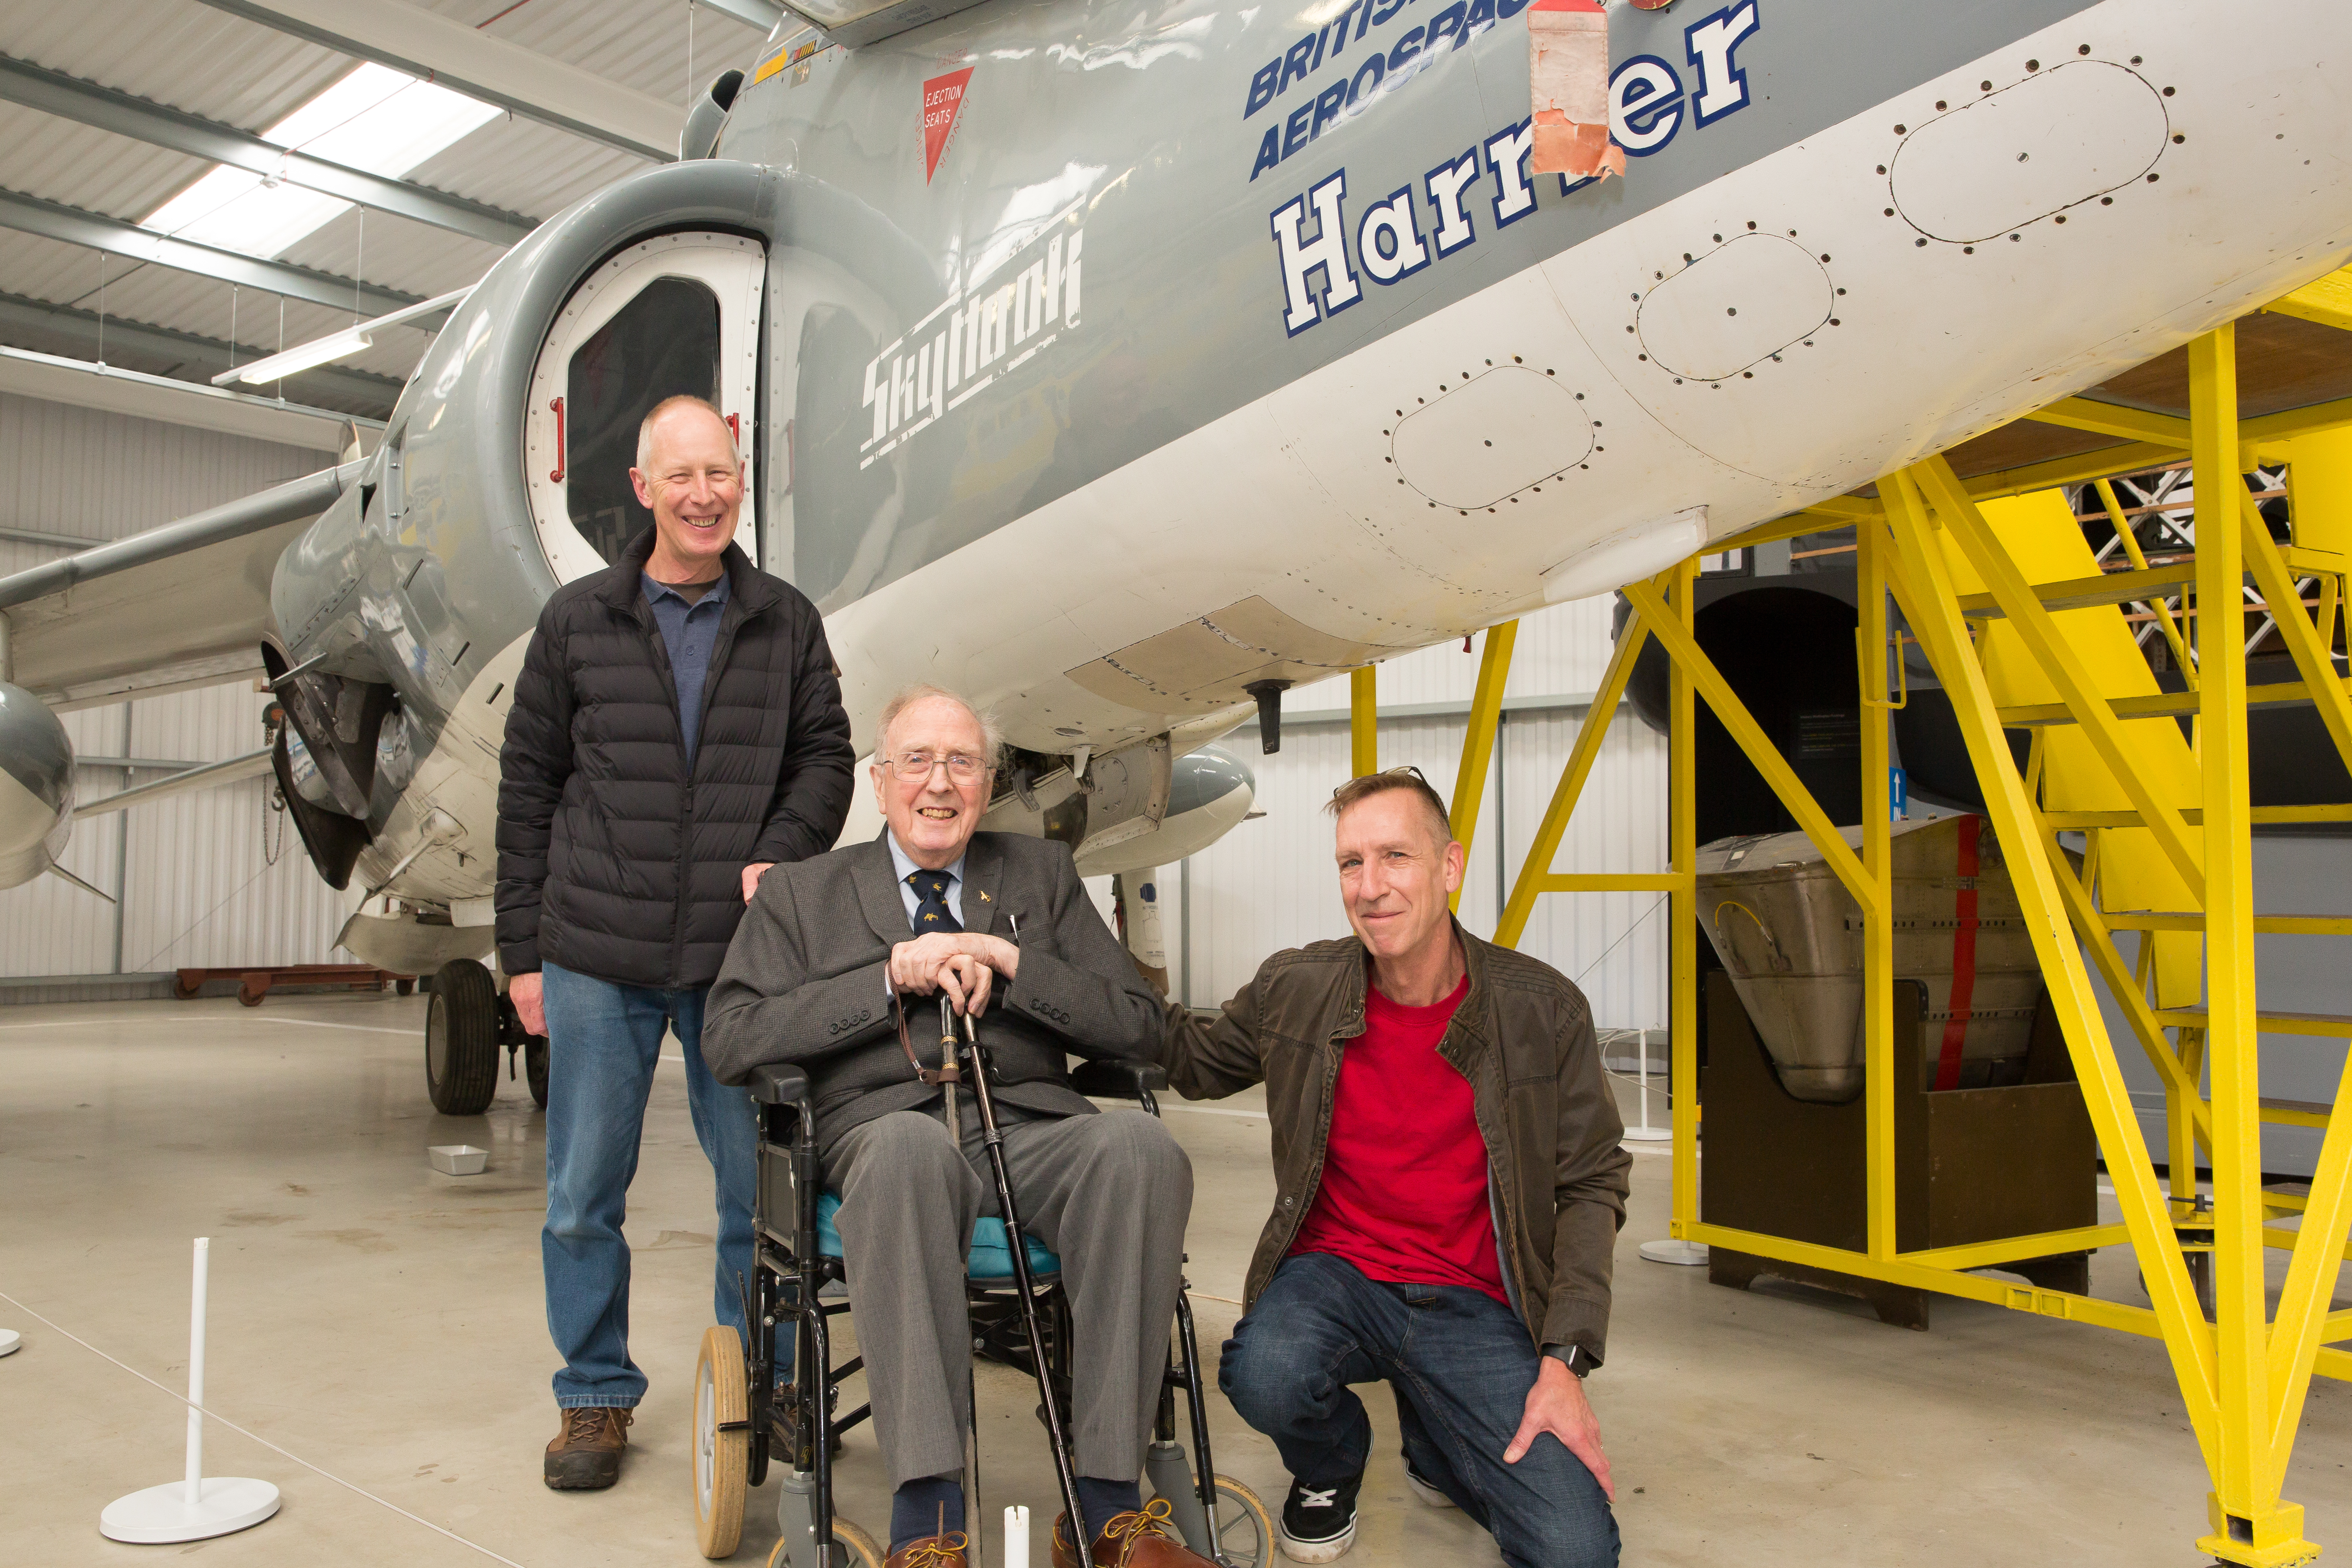 Roy Whitehead with his sons Jon and Rob next to the Harrier jet